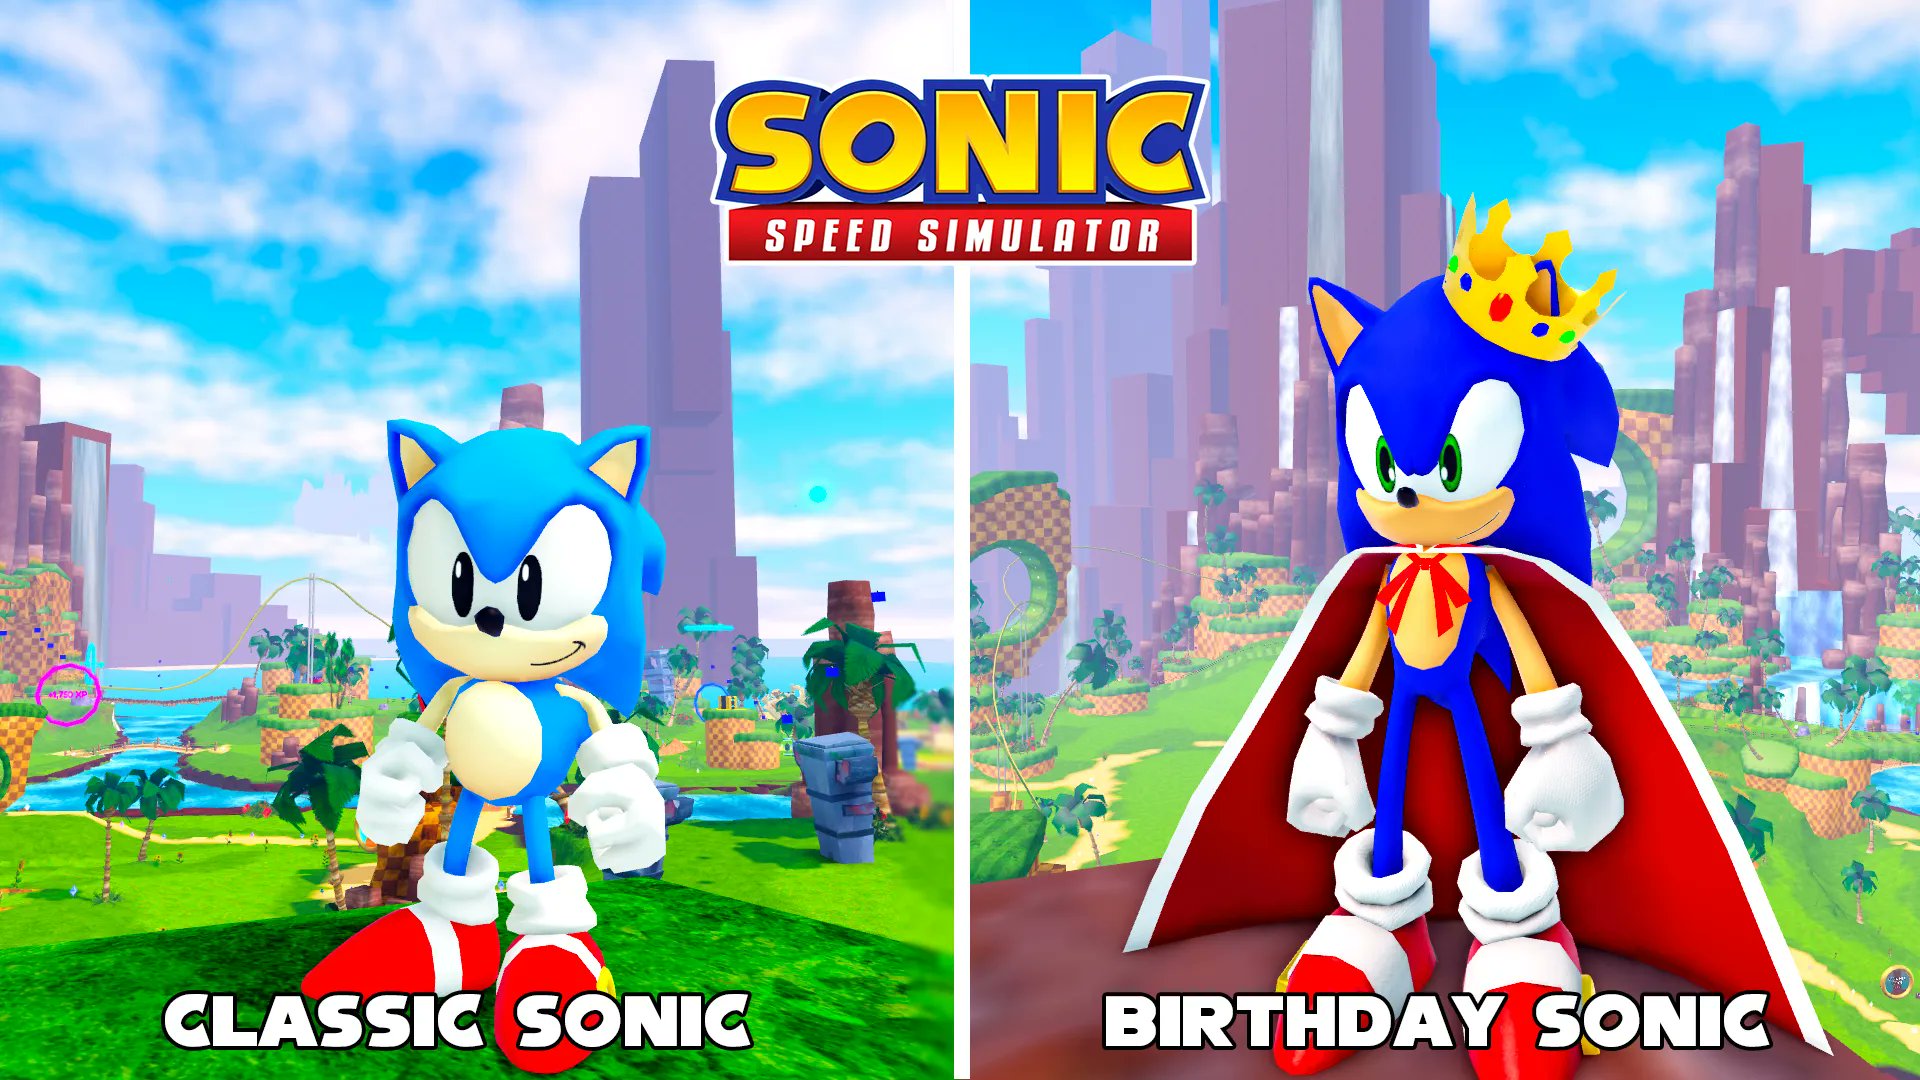 Classic Sonic Simulator Custom BGs on X: Well me and many others